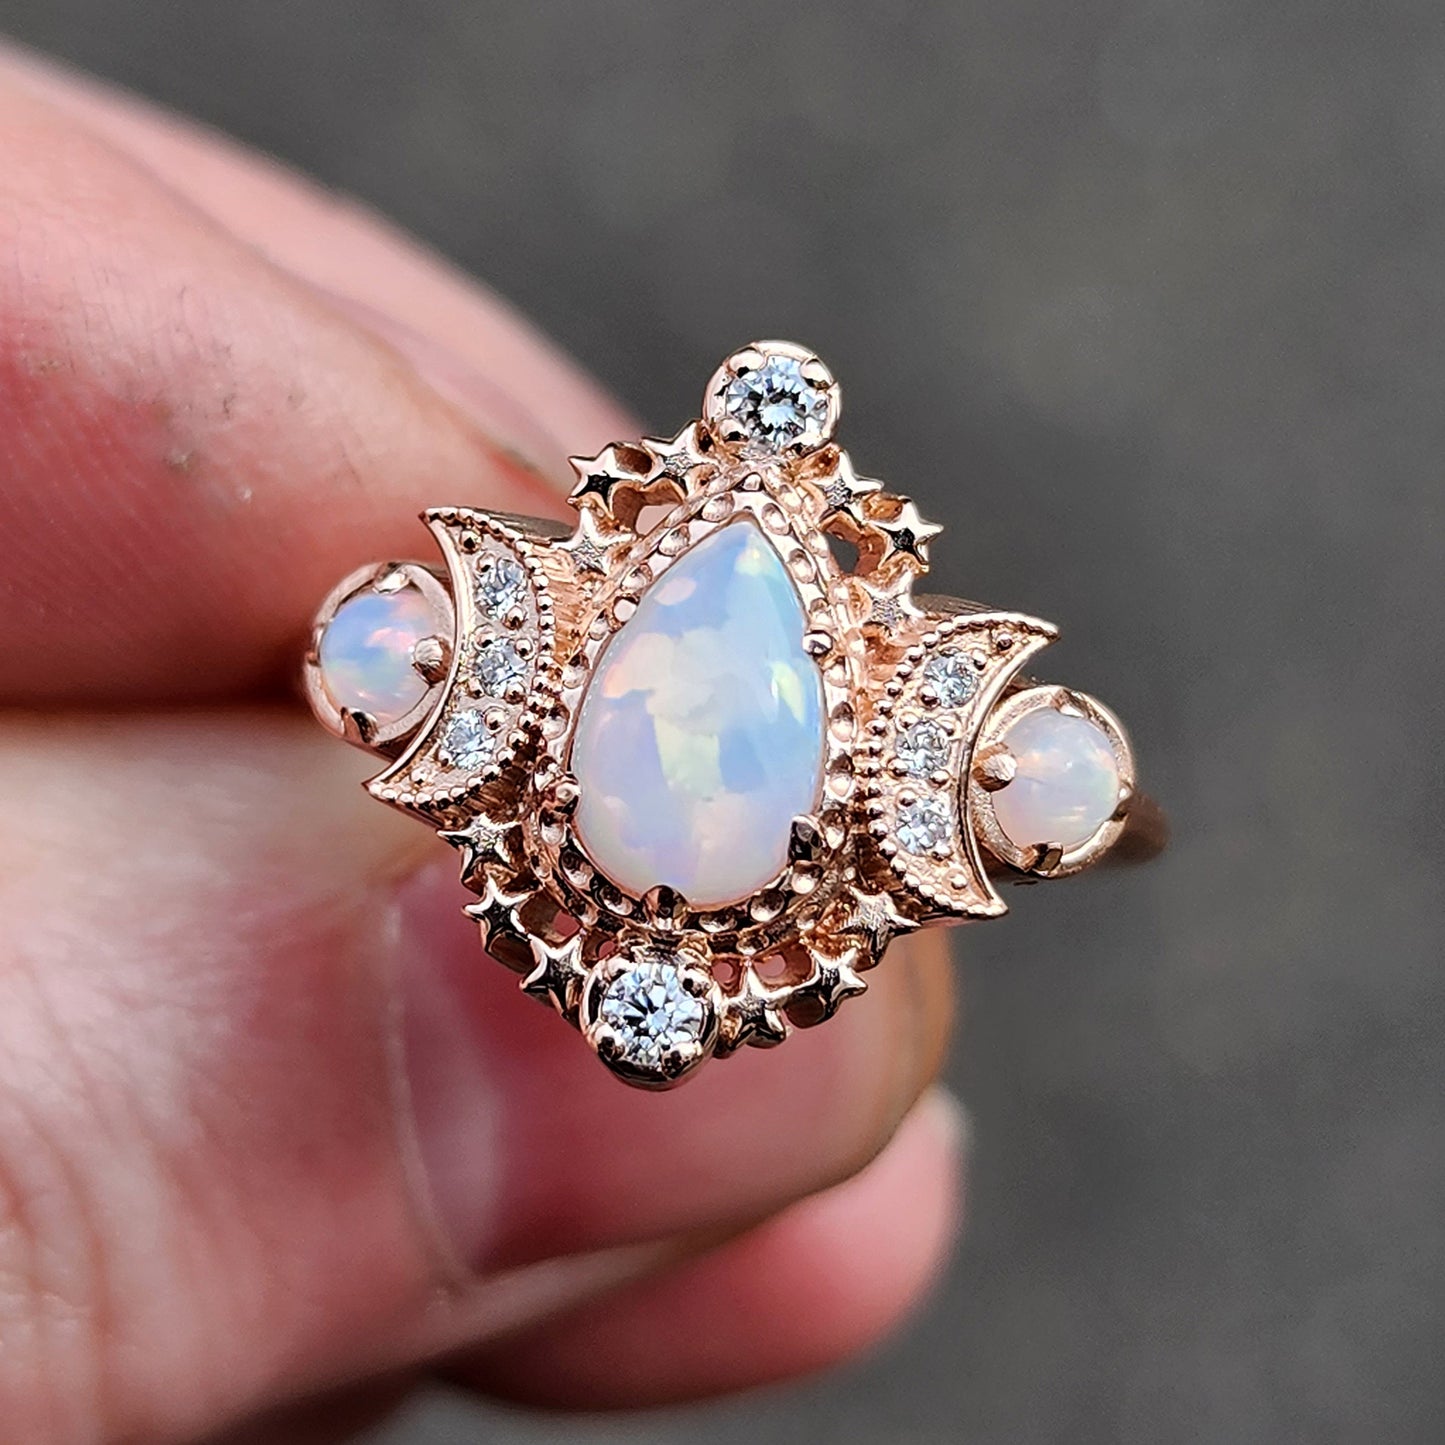 Pear Opal Cosmos Moon Ring with Diamonds - Star and Moon Engagement Ring - Chatham Opals - Celestial Wedding Fine Jewelry